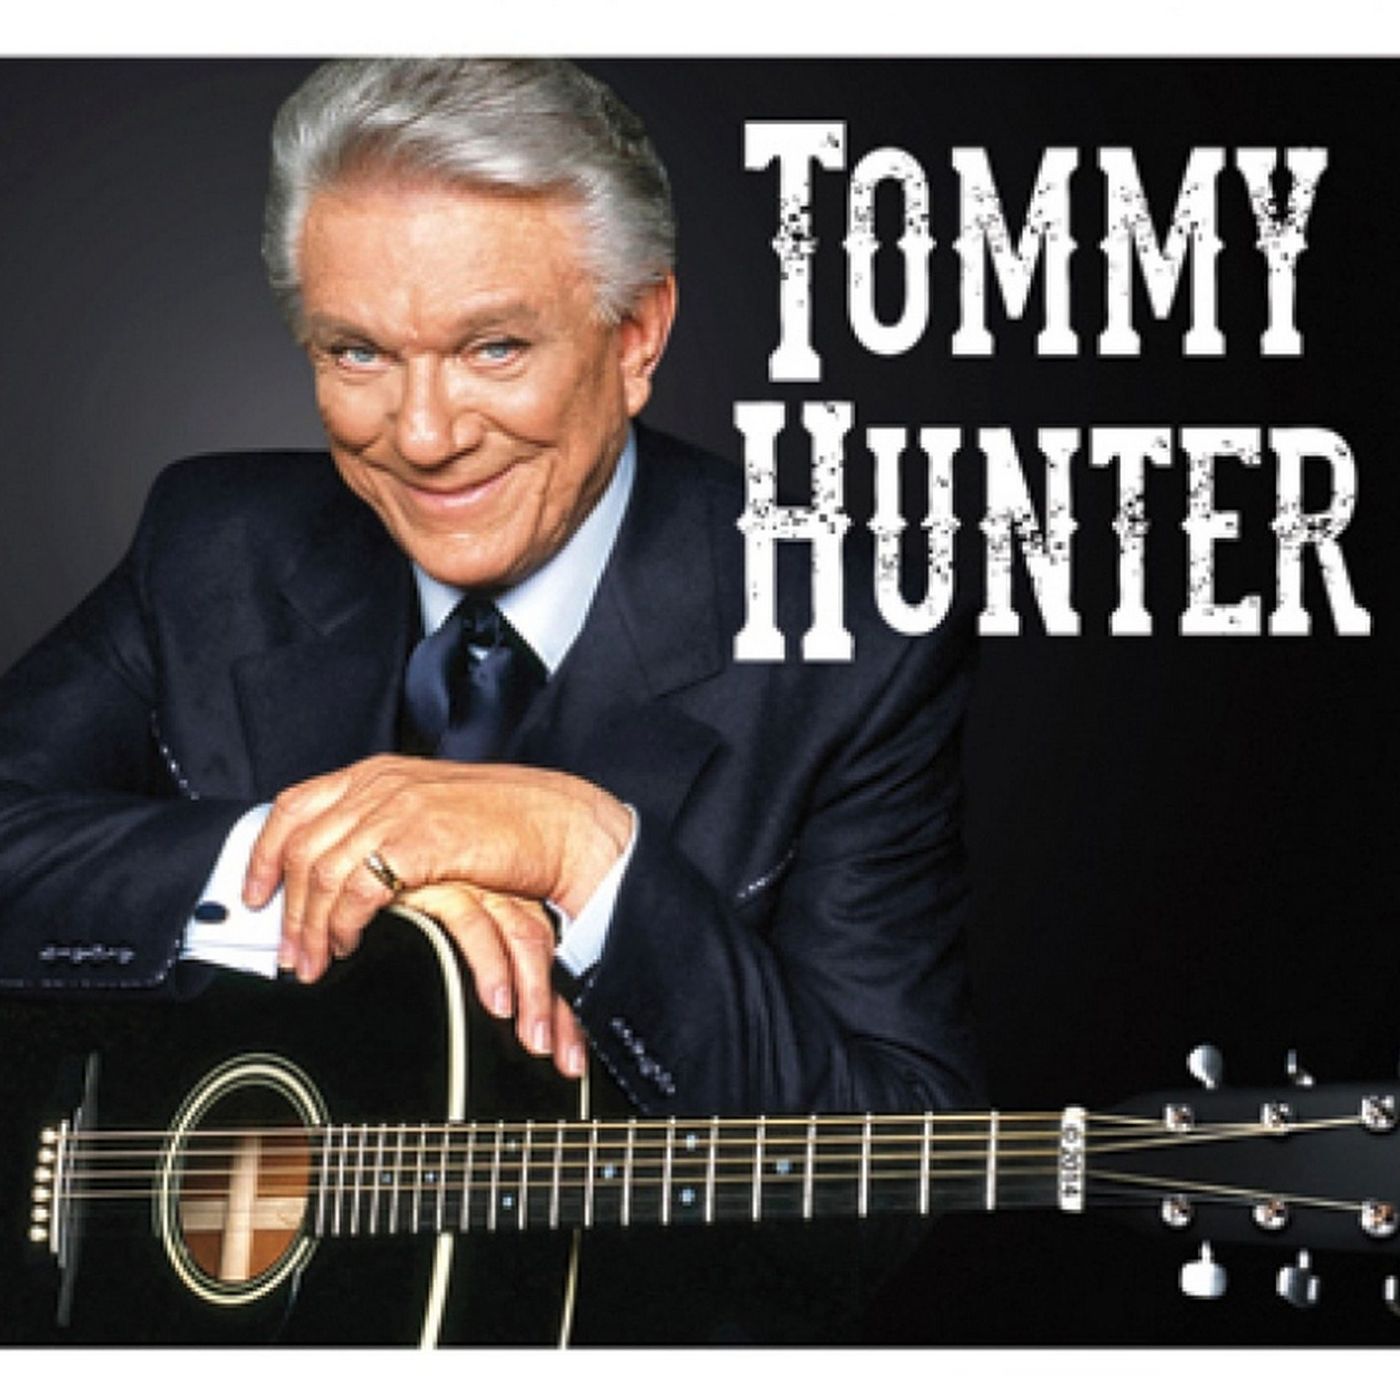 Tommy Solo's famous friends "classic" featuring Tommy Hunter